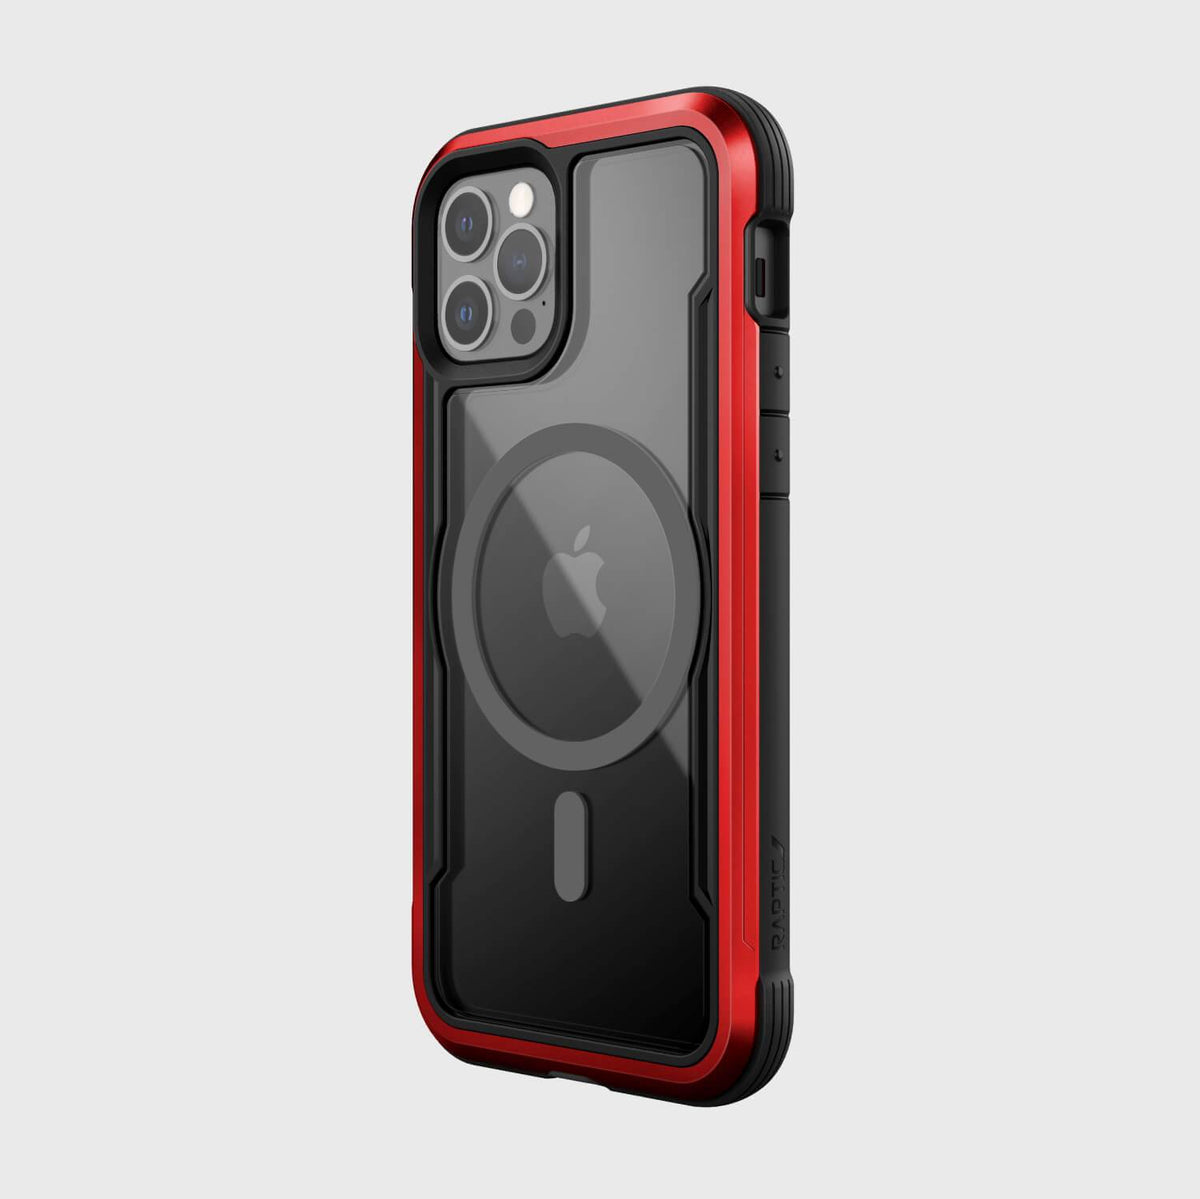 The iPhone 12 Pro Max Case - SHIELD PRO MAGNET by Raptic is red and black, compatible with MagSafe chargers.